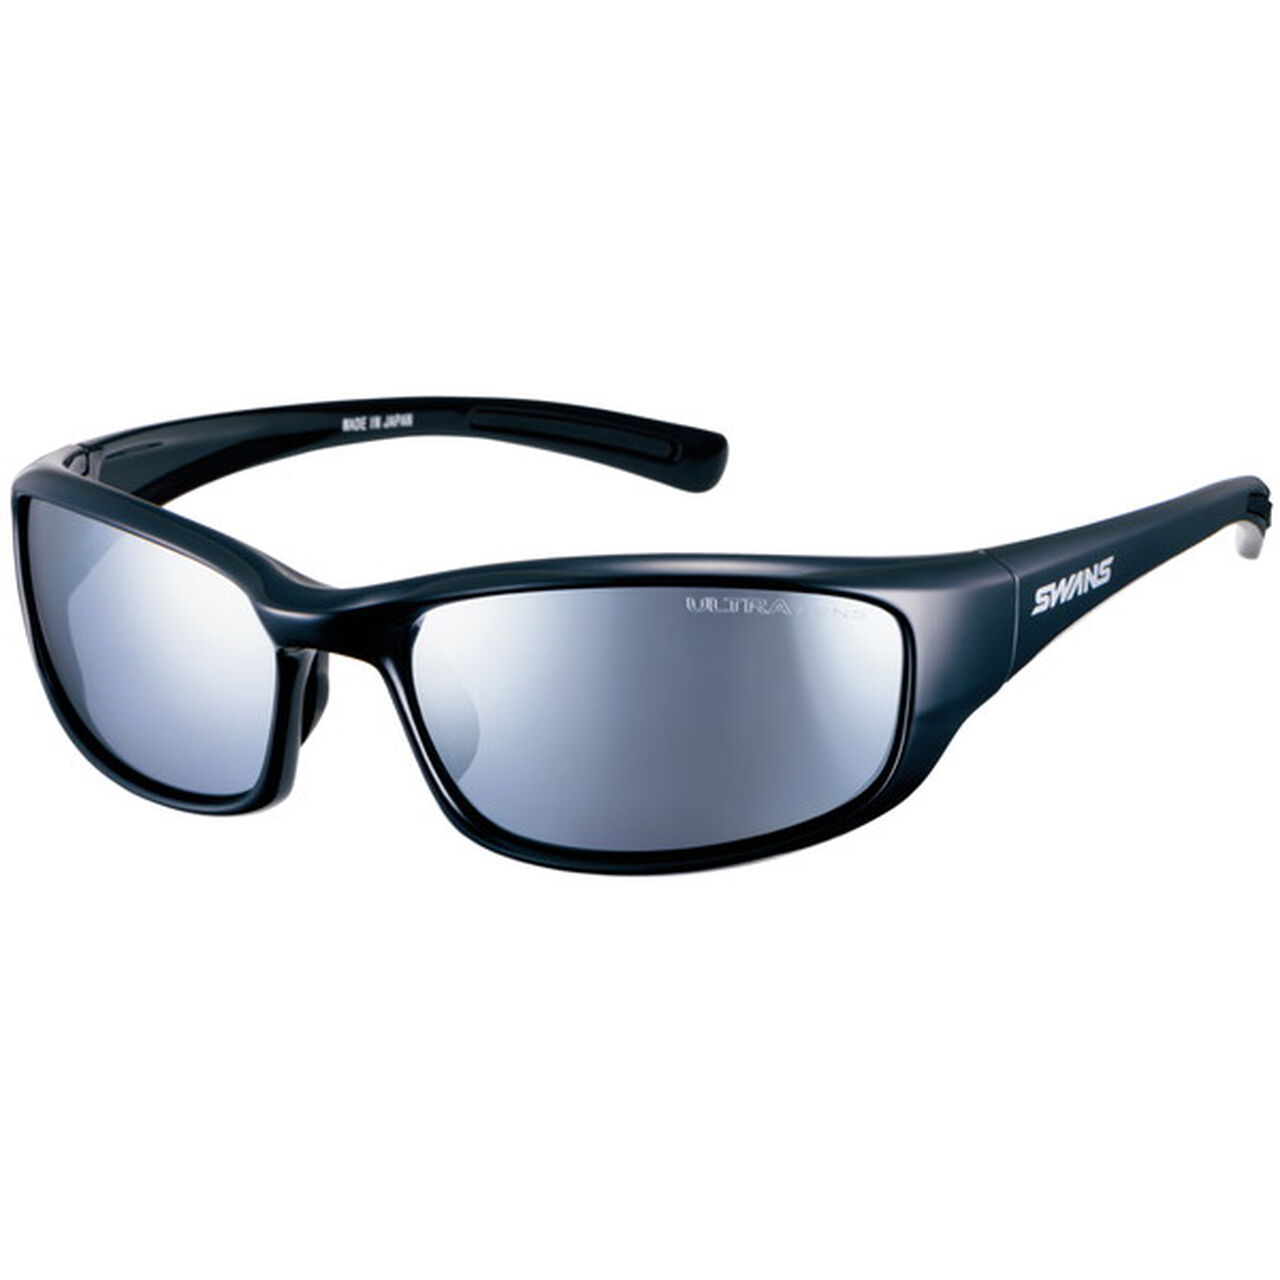 WARRIOR-Ⅶ 3167 BK Silver mirror x Polarized ULTRA Iceblue,Opt5, large image number 0